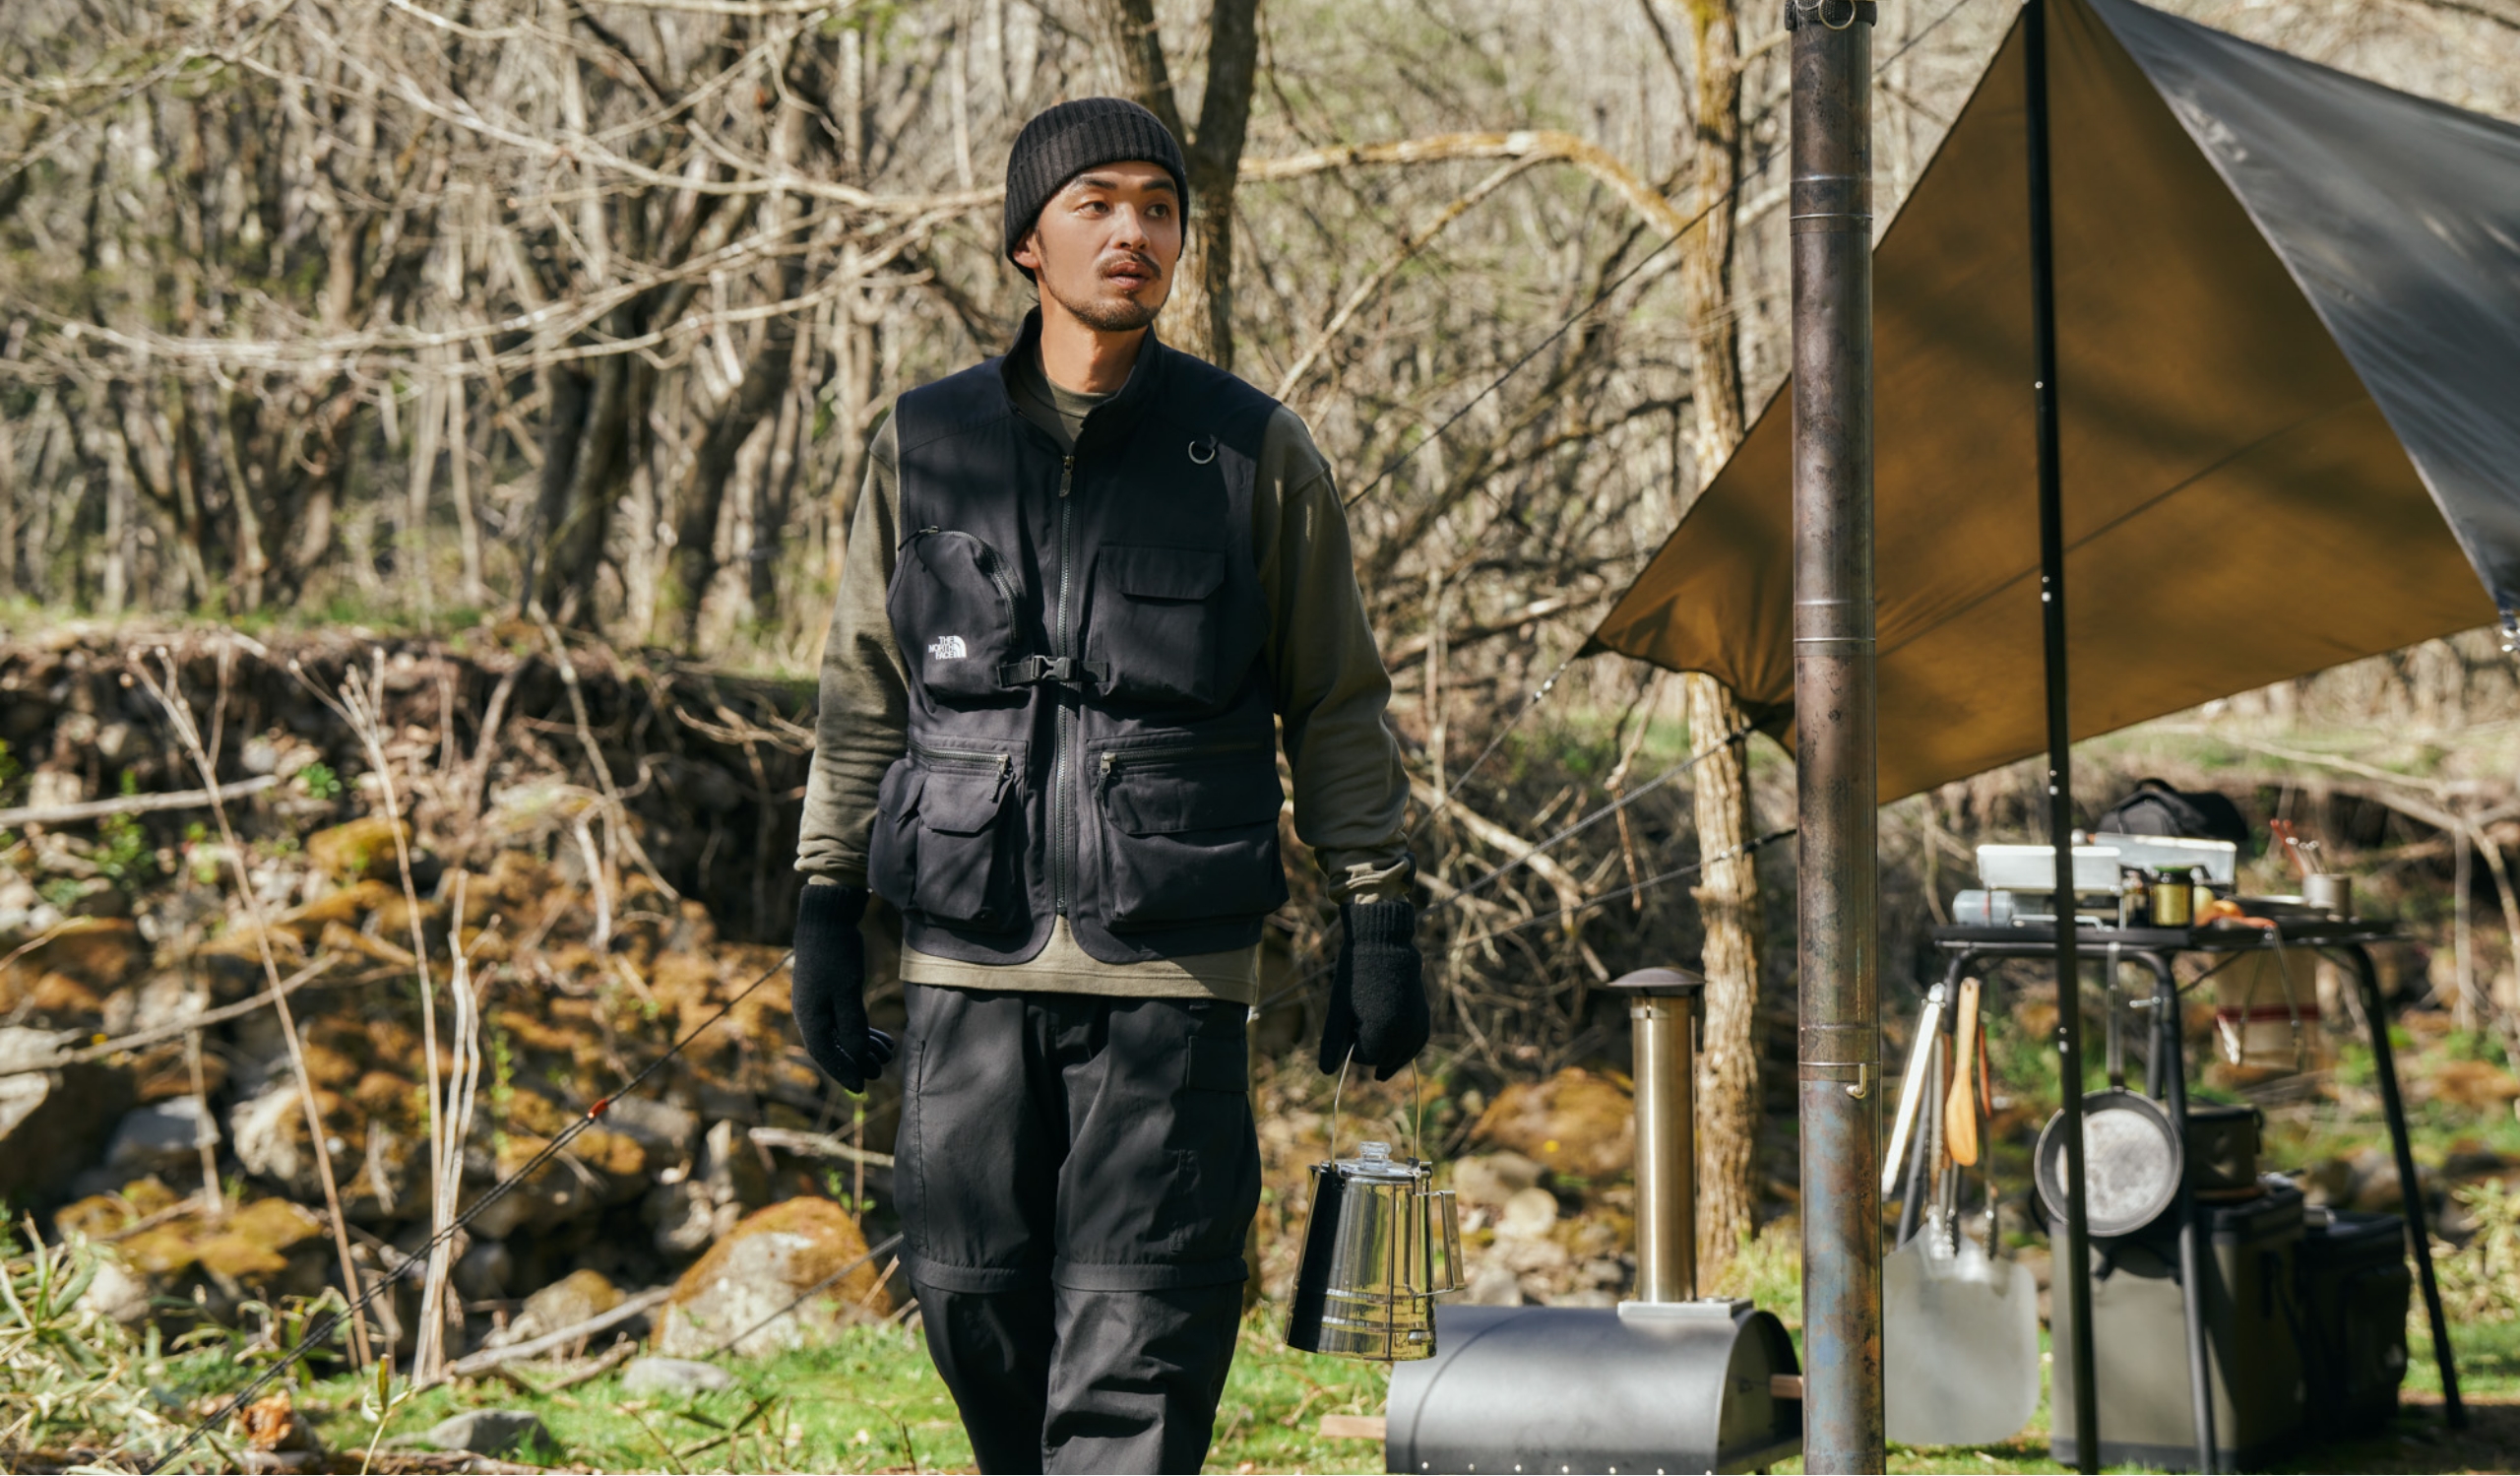 Firefly Utility Vest | Online Camp Store | THE NORTH FACE CAMP